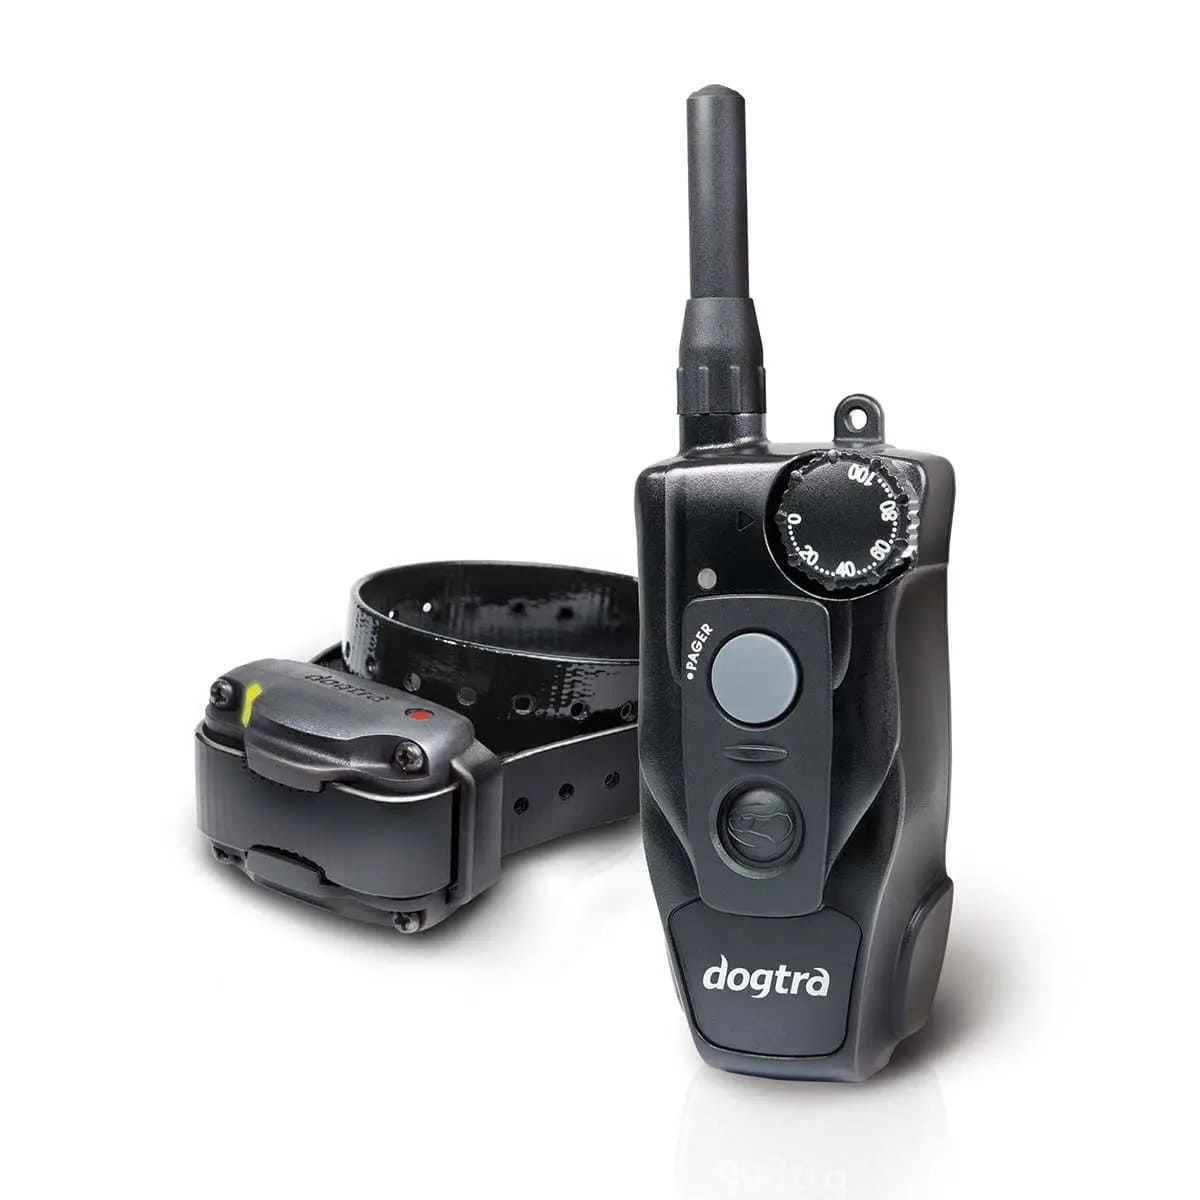 Dogtra Compact 1/2 Mile Remote Dog Trainer 1 Dog System Actual